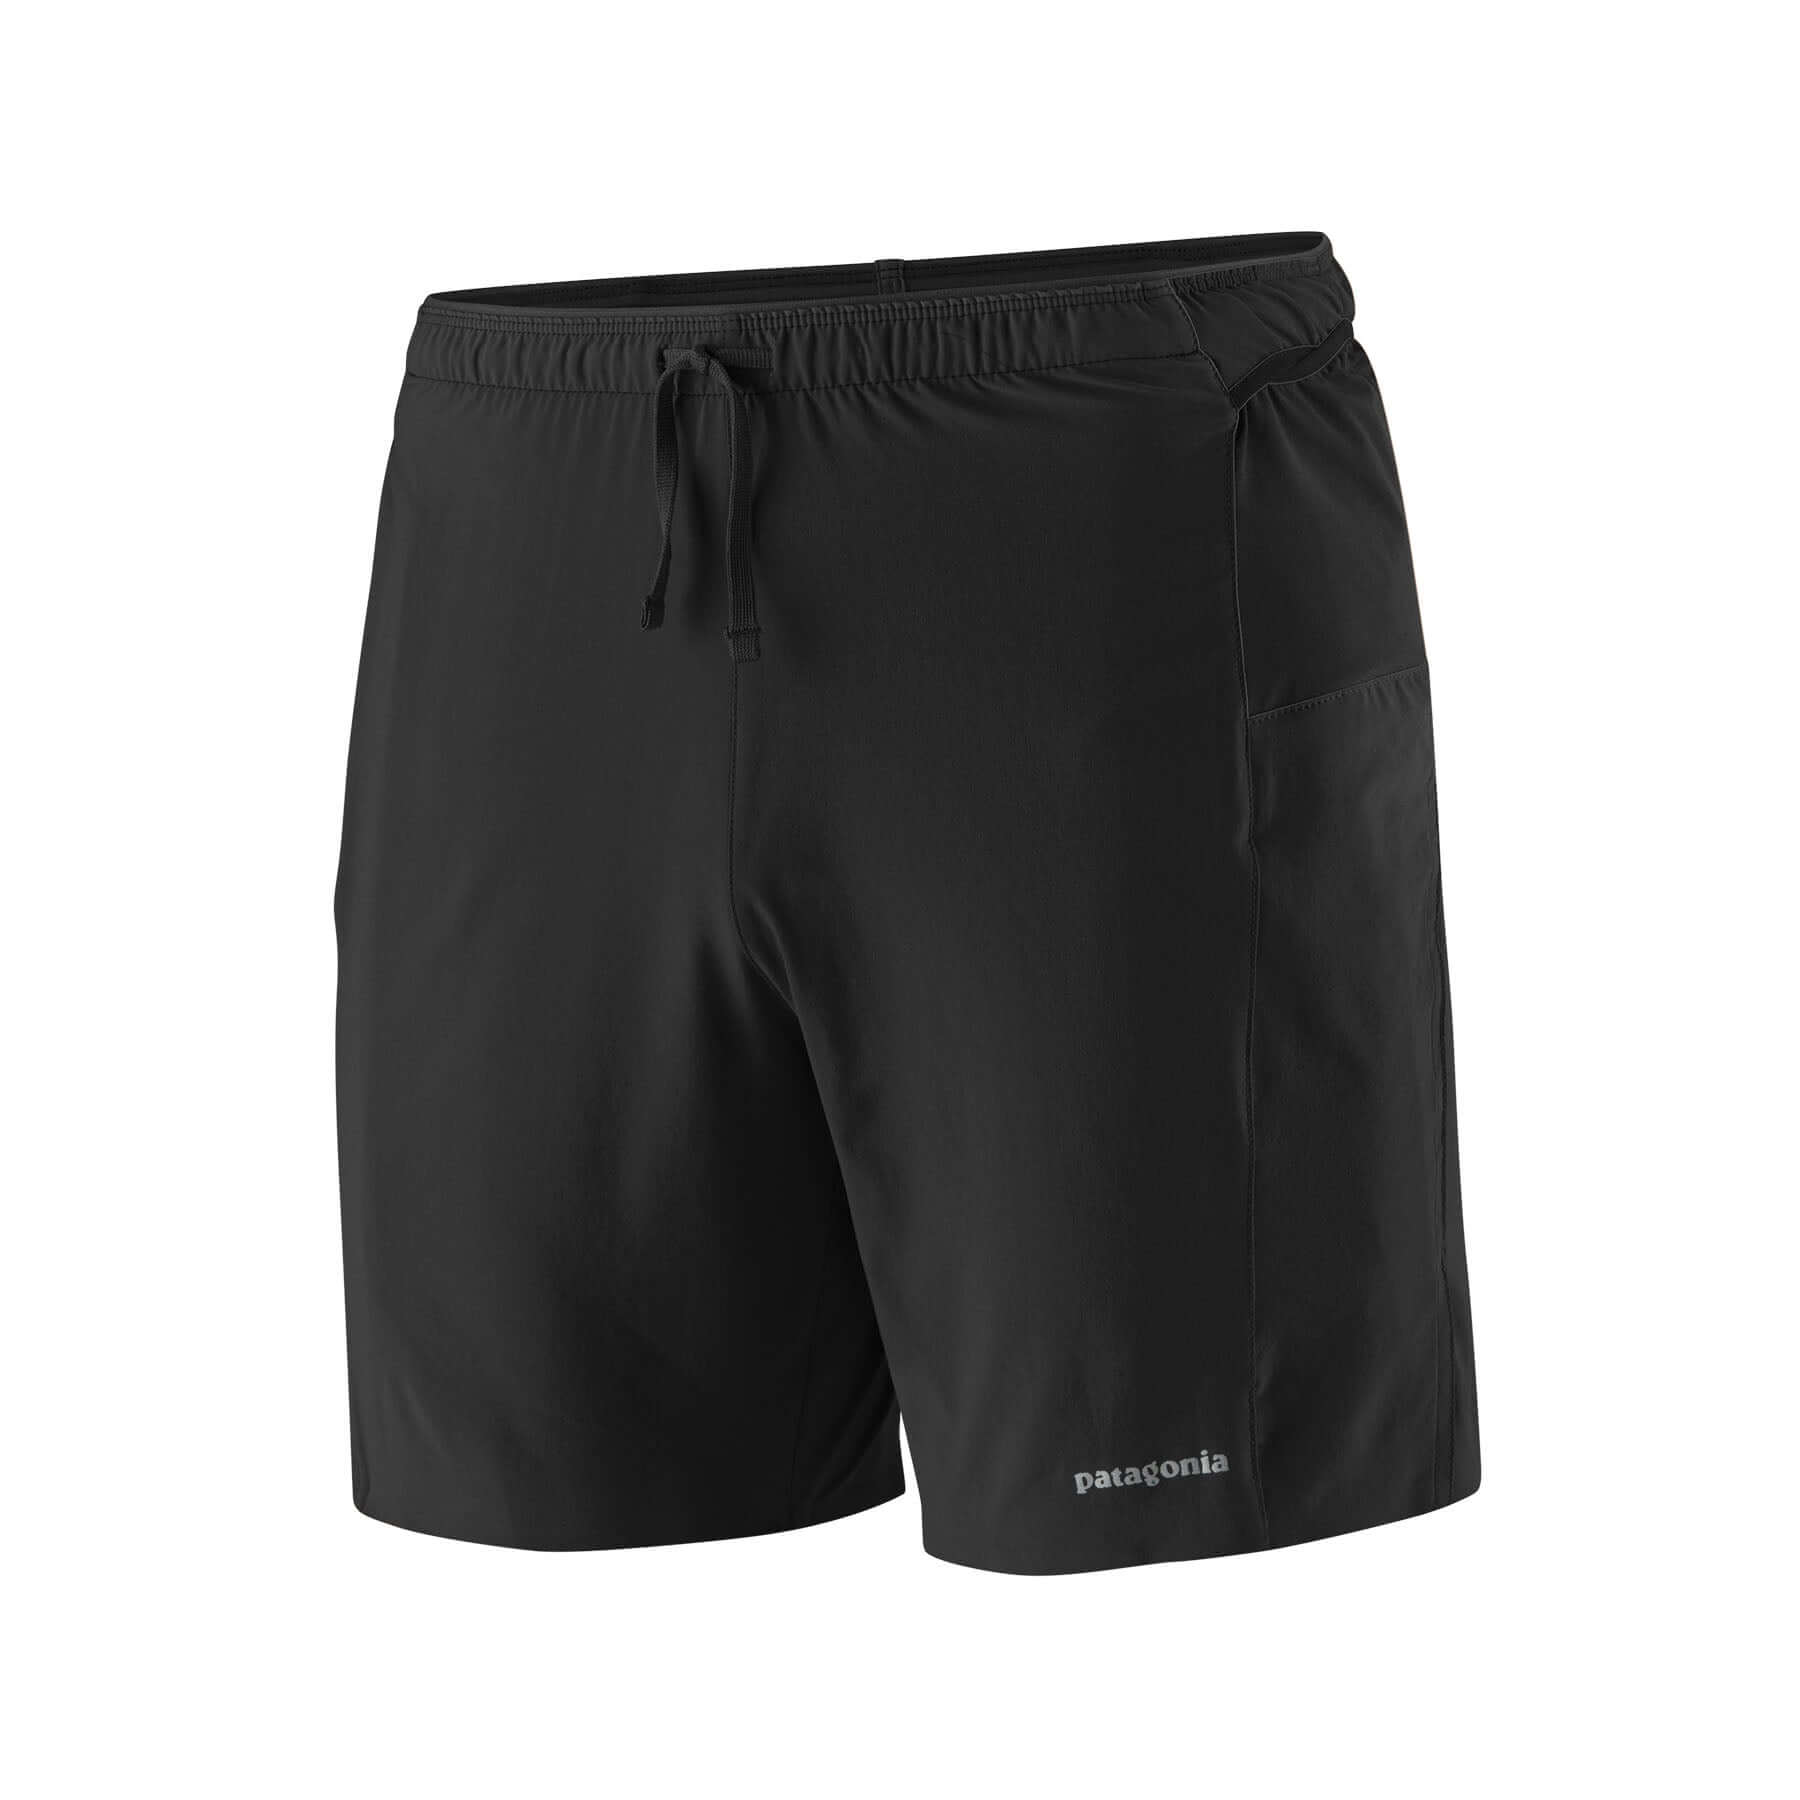 M's Strider Pro Shorts - 7 in.